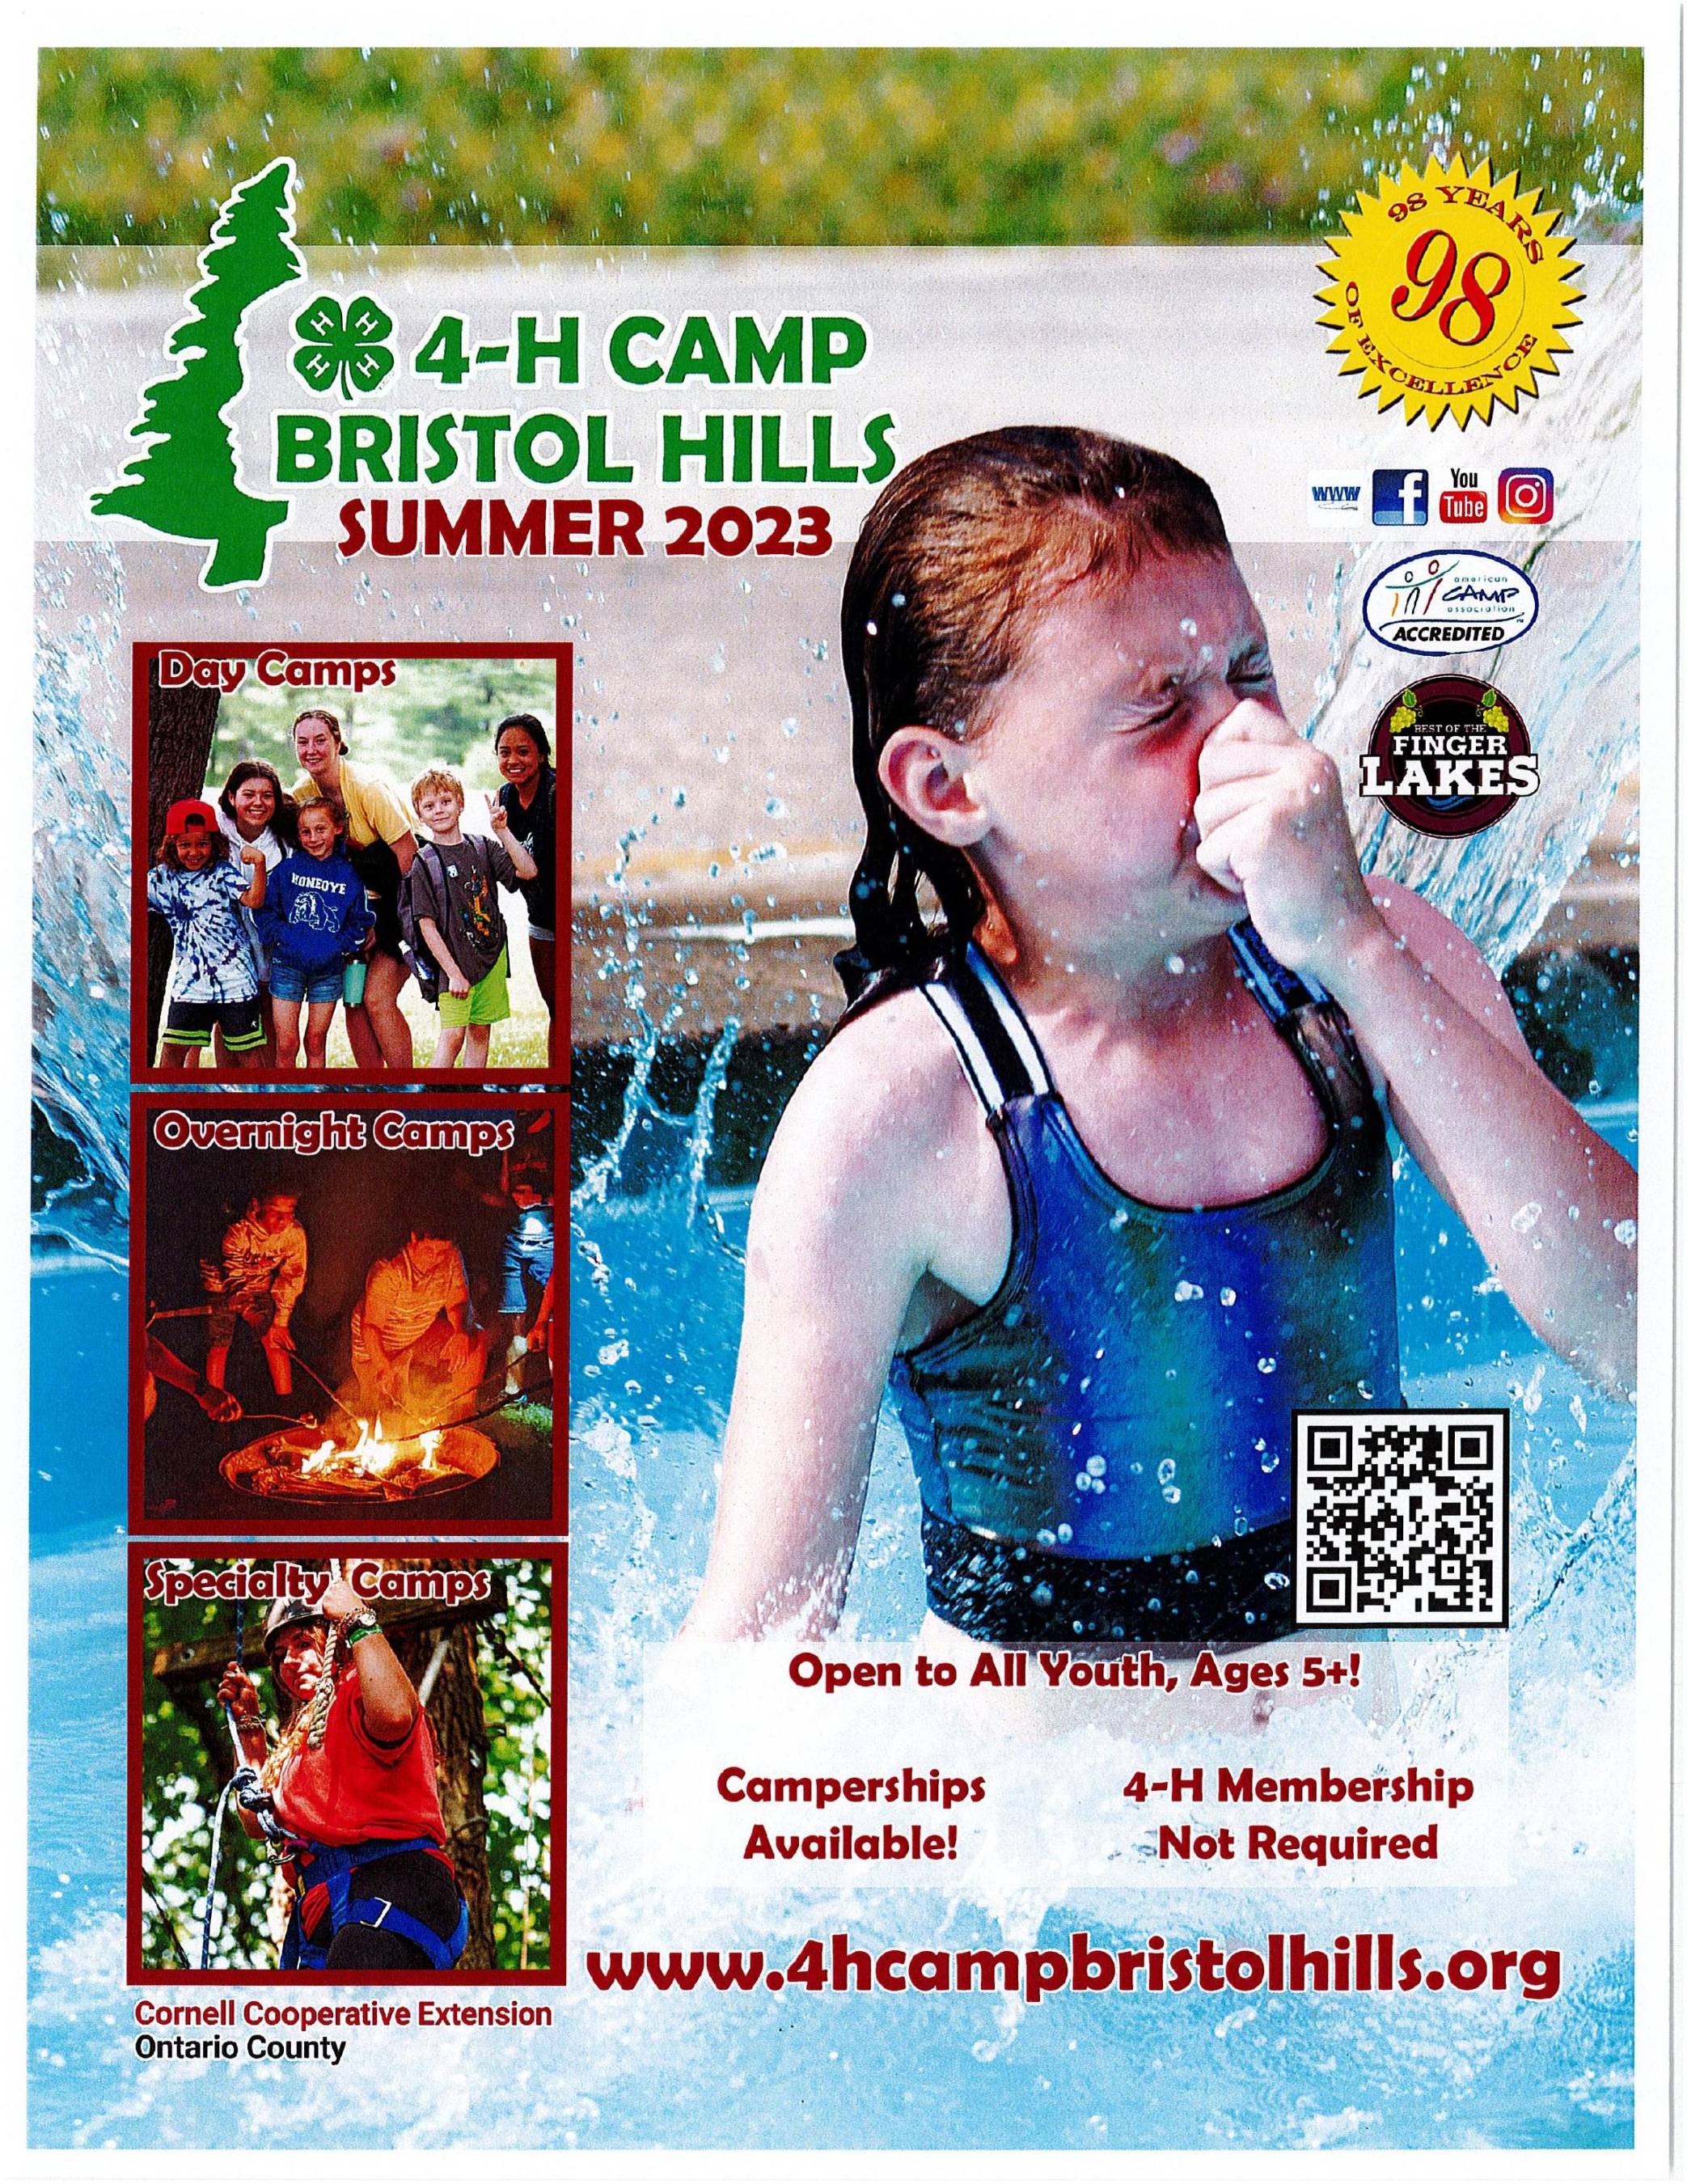 4-H camp info for 2023-page-001 - Copy (2)